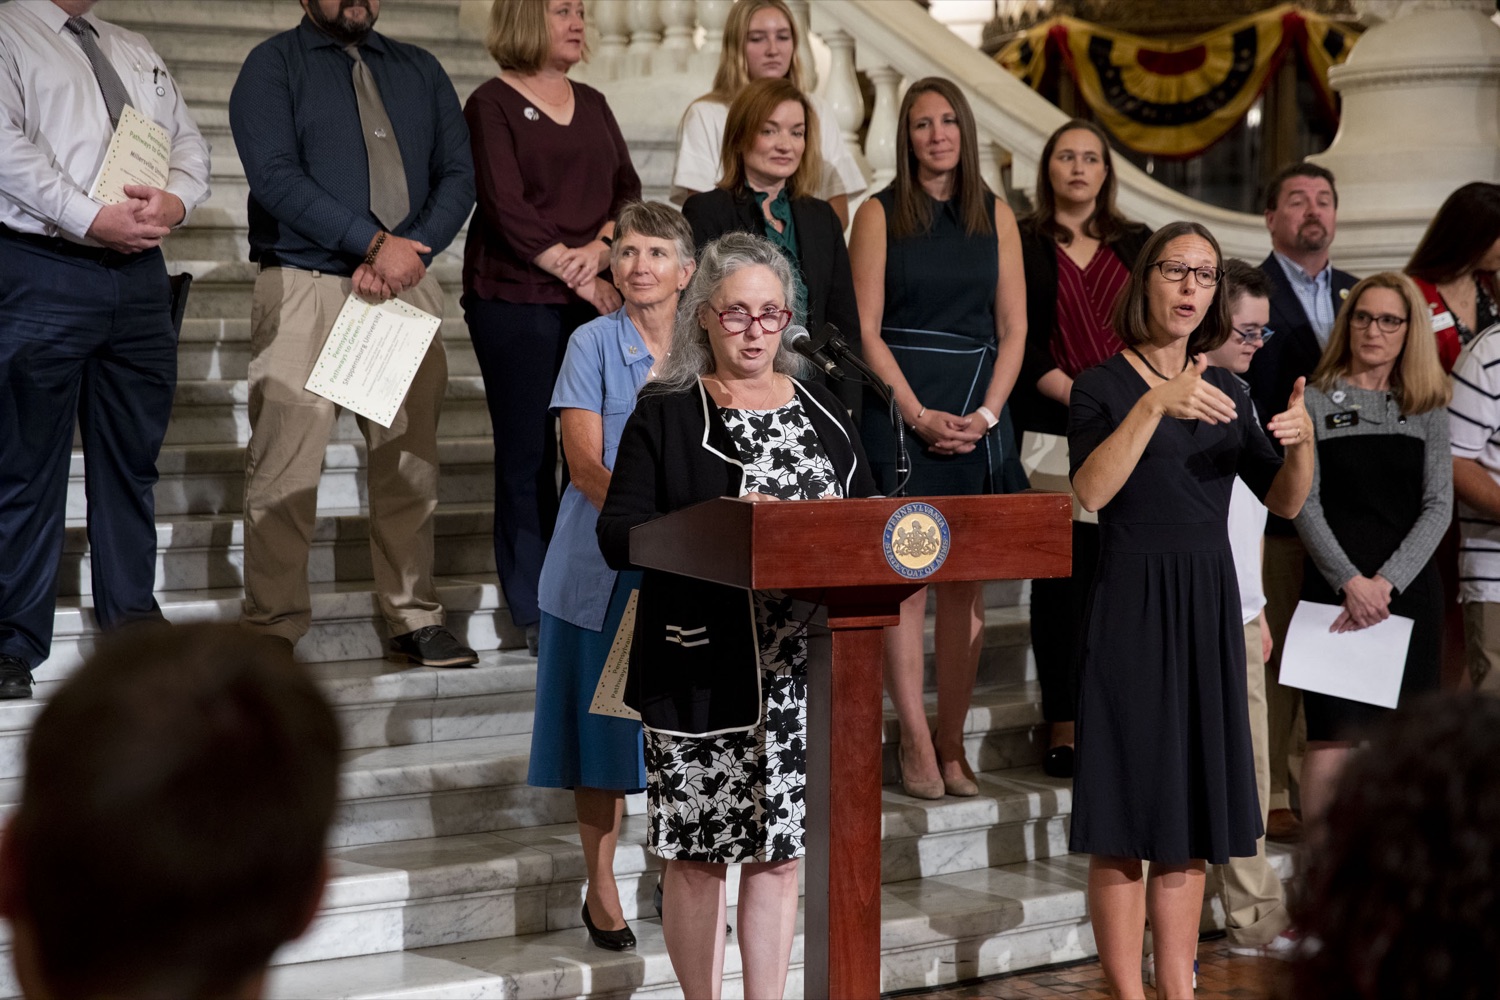 Tammie Peffer, Department of Education Environment and Ecology Content Advisor, applauds schools for helping students engage in environmental sustainability practices, in Harrisburg, PA on September 20, 2022.<br><a href="https://filesource.amperwave.net/commonwealthofpa/photo/22151_dcnr_pathways_cz_08.jpg" target="_blank">⇣ Download Photo</a>